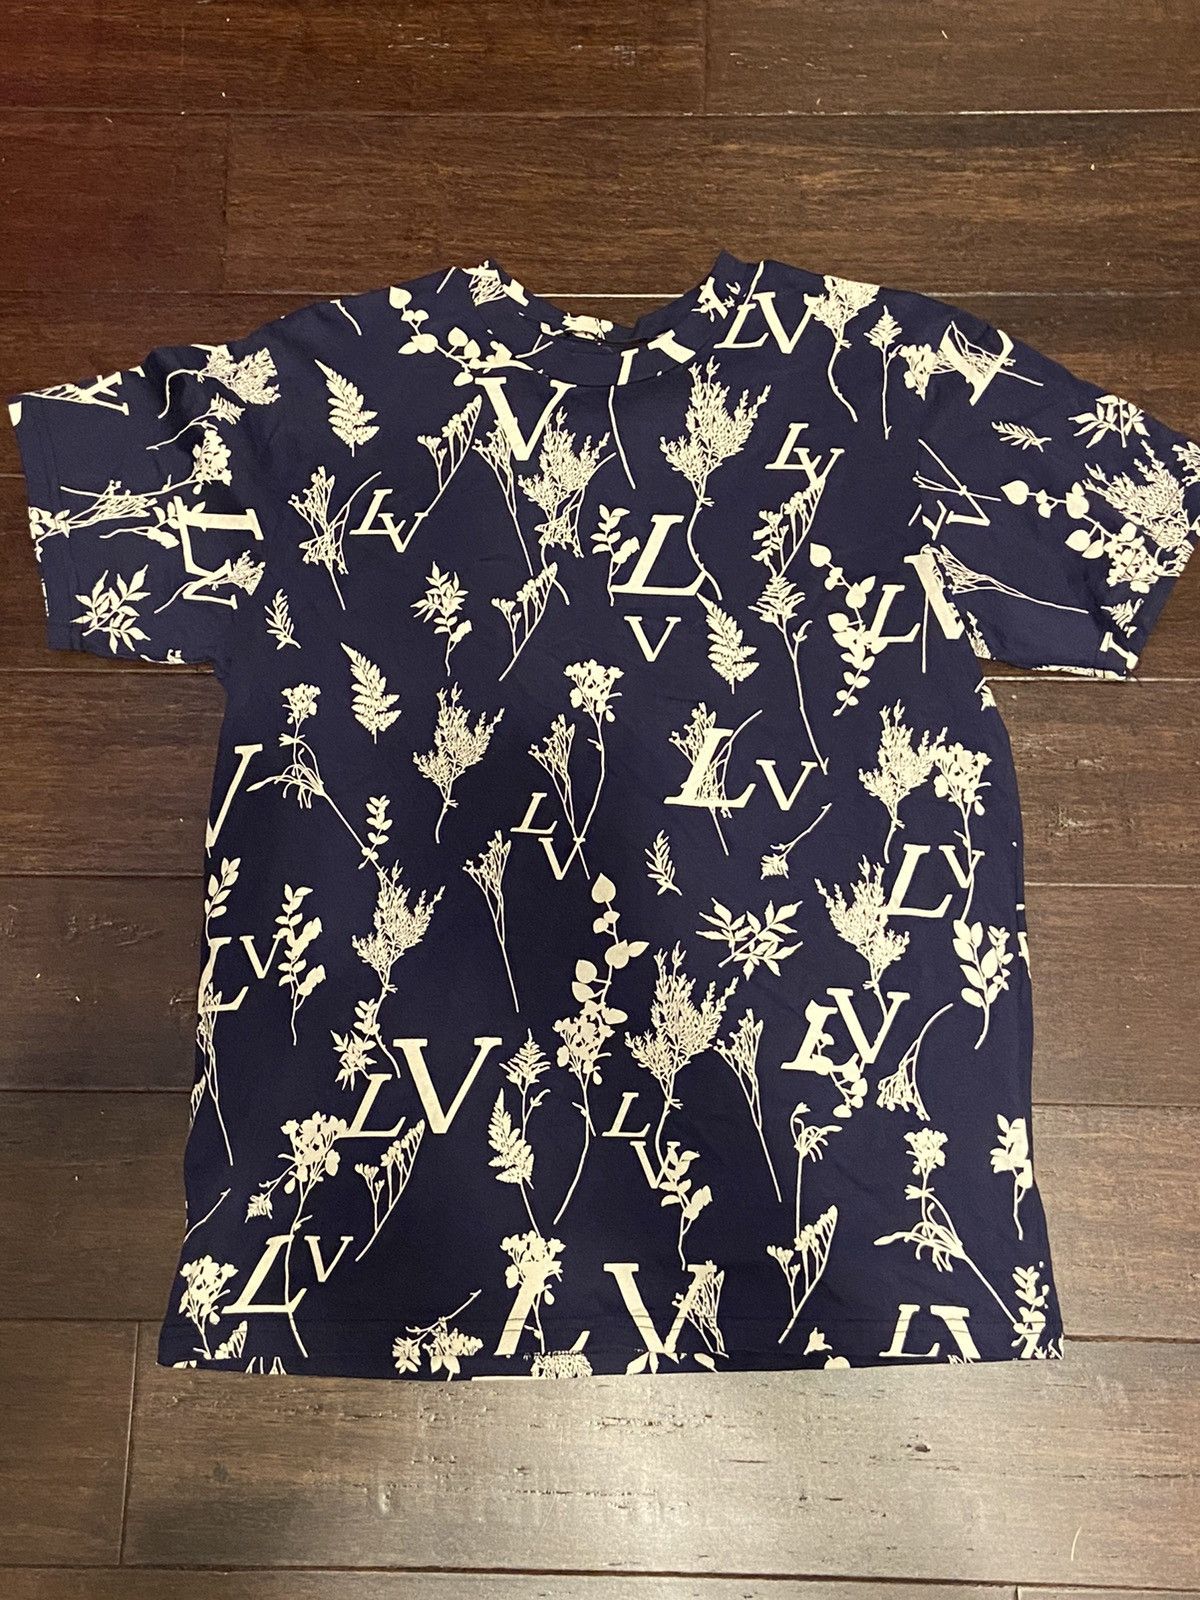 Compare prices for LV Leaf Discharge T-Shirt (1A7X2Z) in official stores